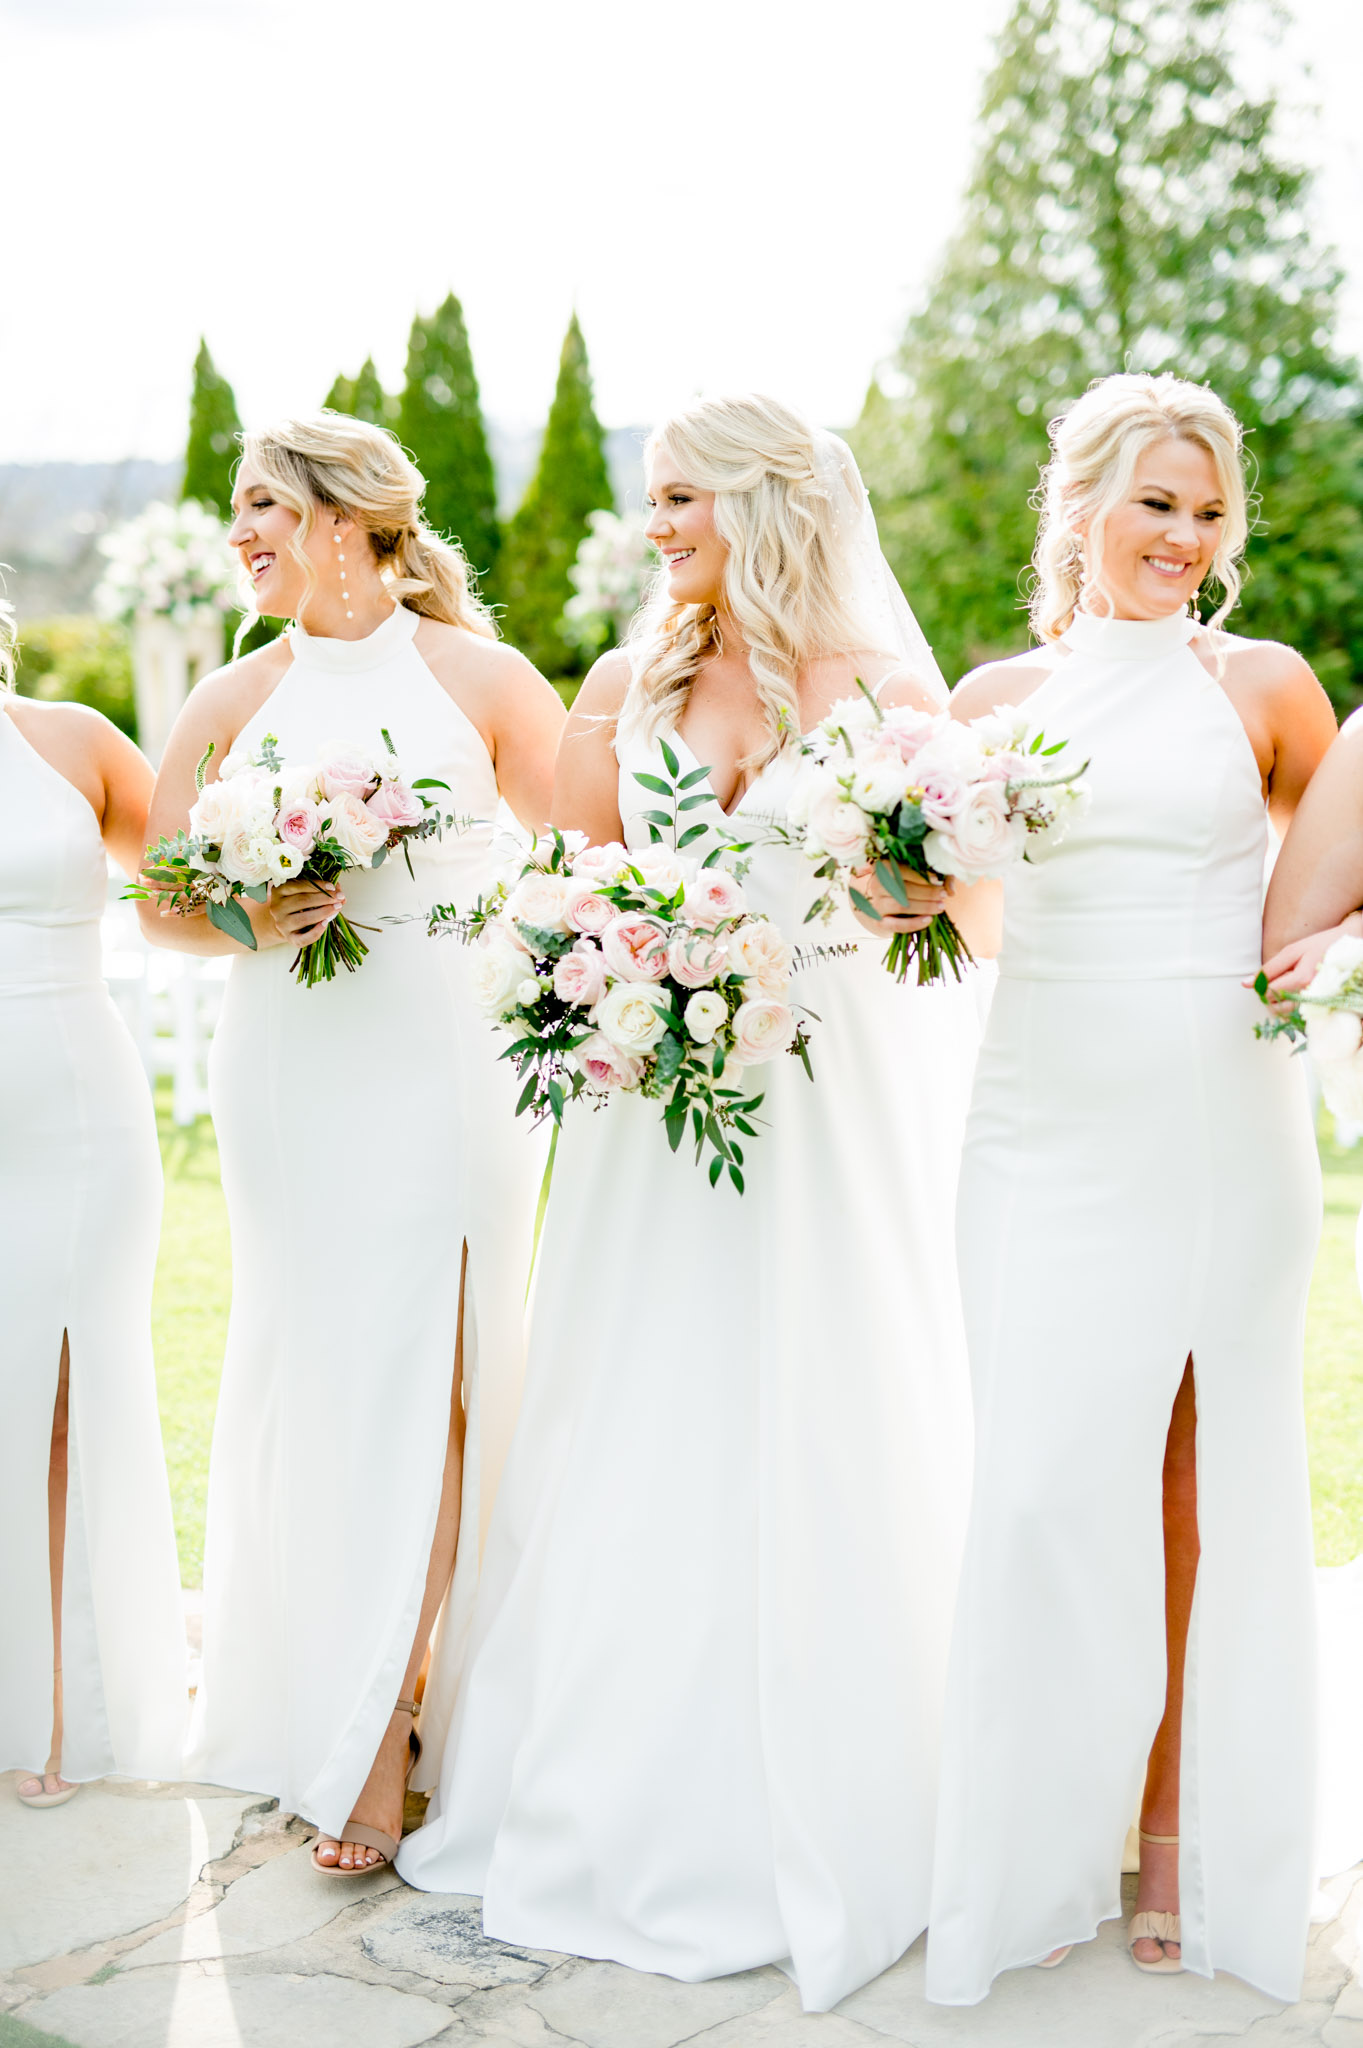 Bride laughs as she walks with bridesmaids.